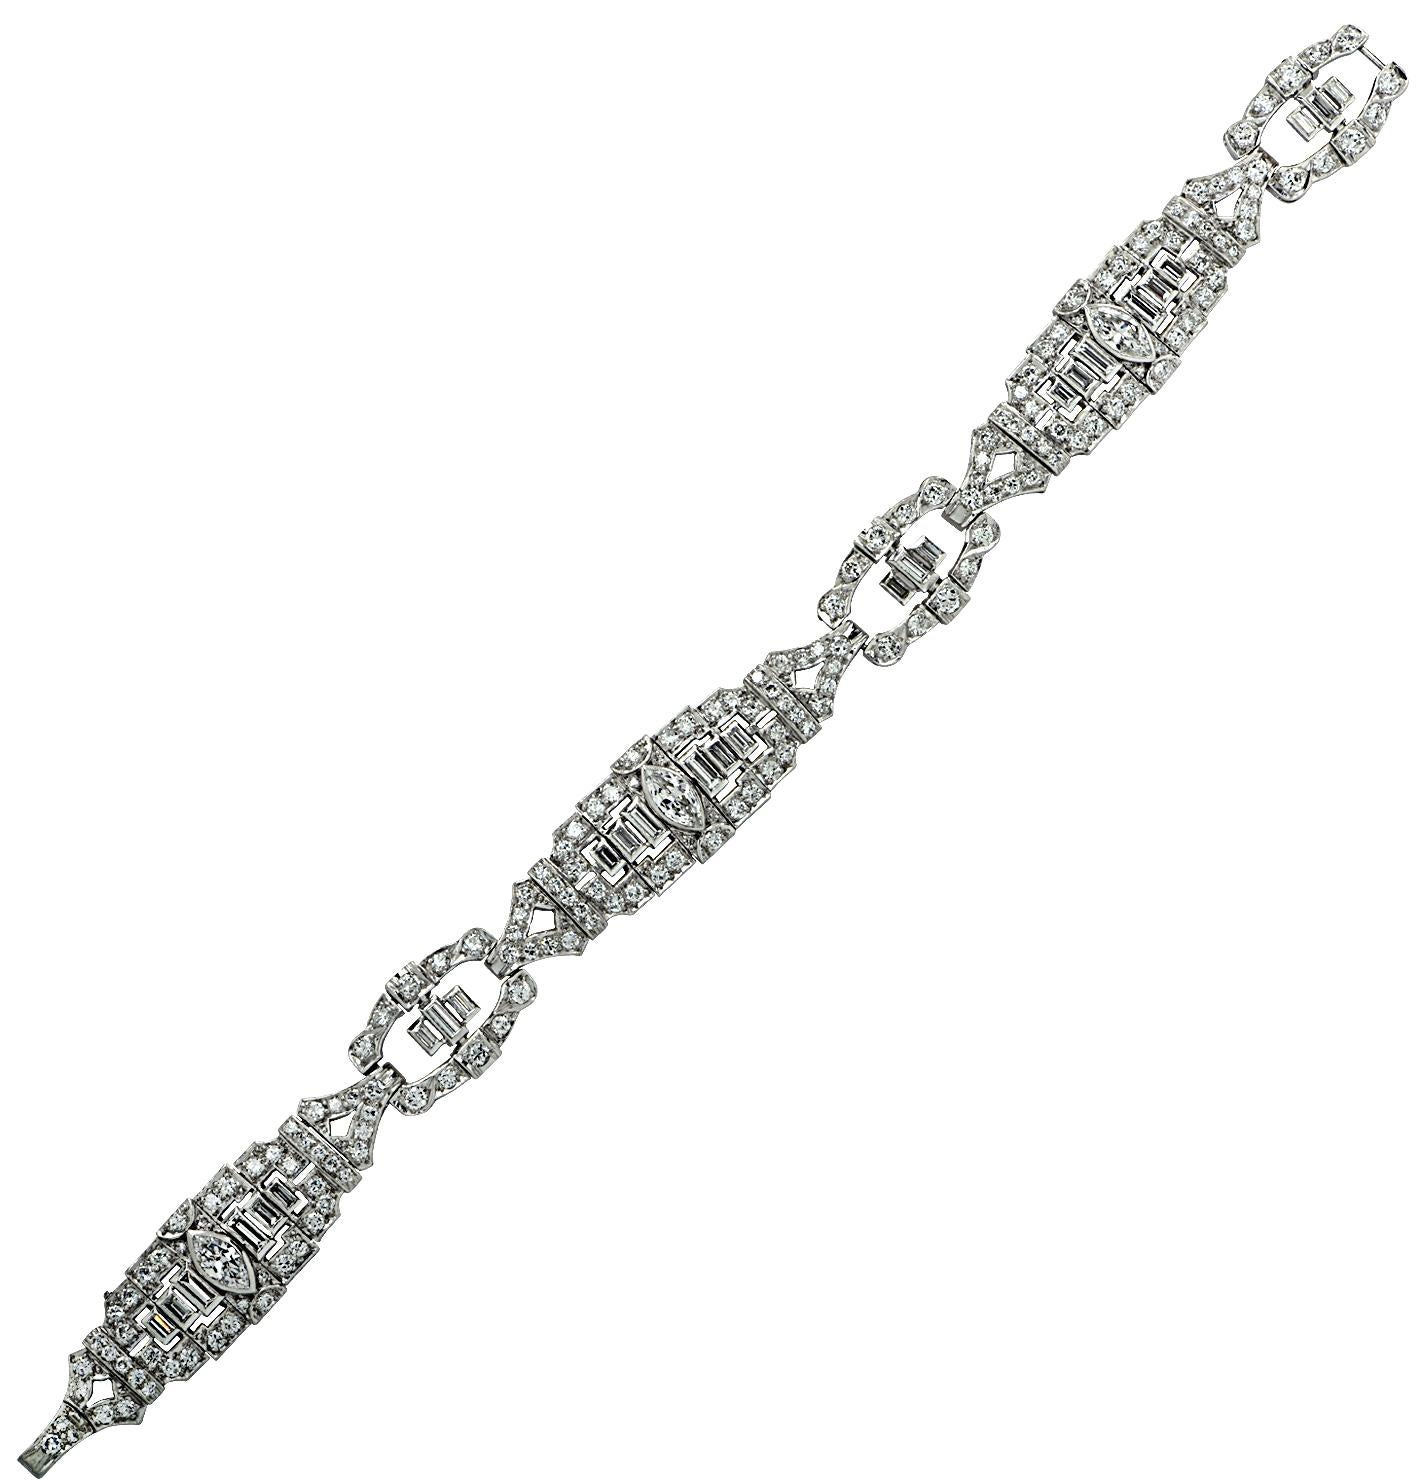 Beautiful Art Deco bracelet finely crafted in platinum featuring 3 marquise cut diamonds weighing approximately 1 carat total, 27 baguette cut diamonds weighing approximately 1.80 carats total and 172 mixed round brilliant cut and single cut